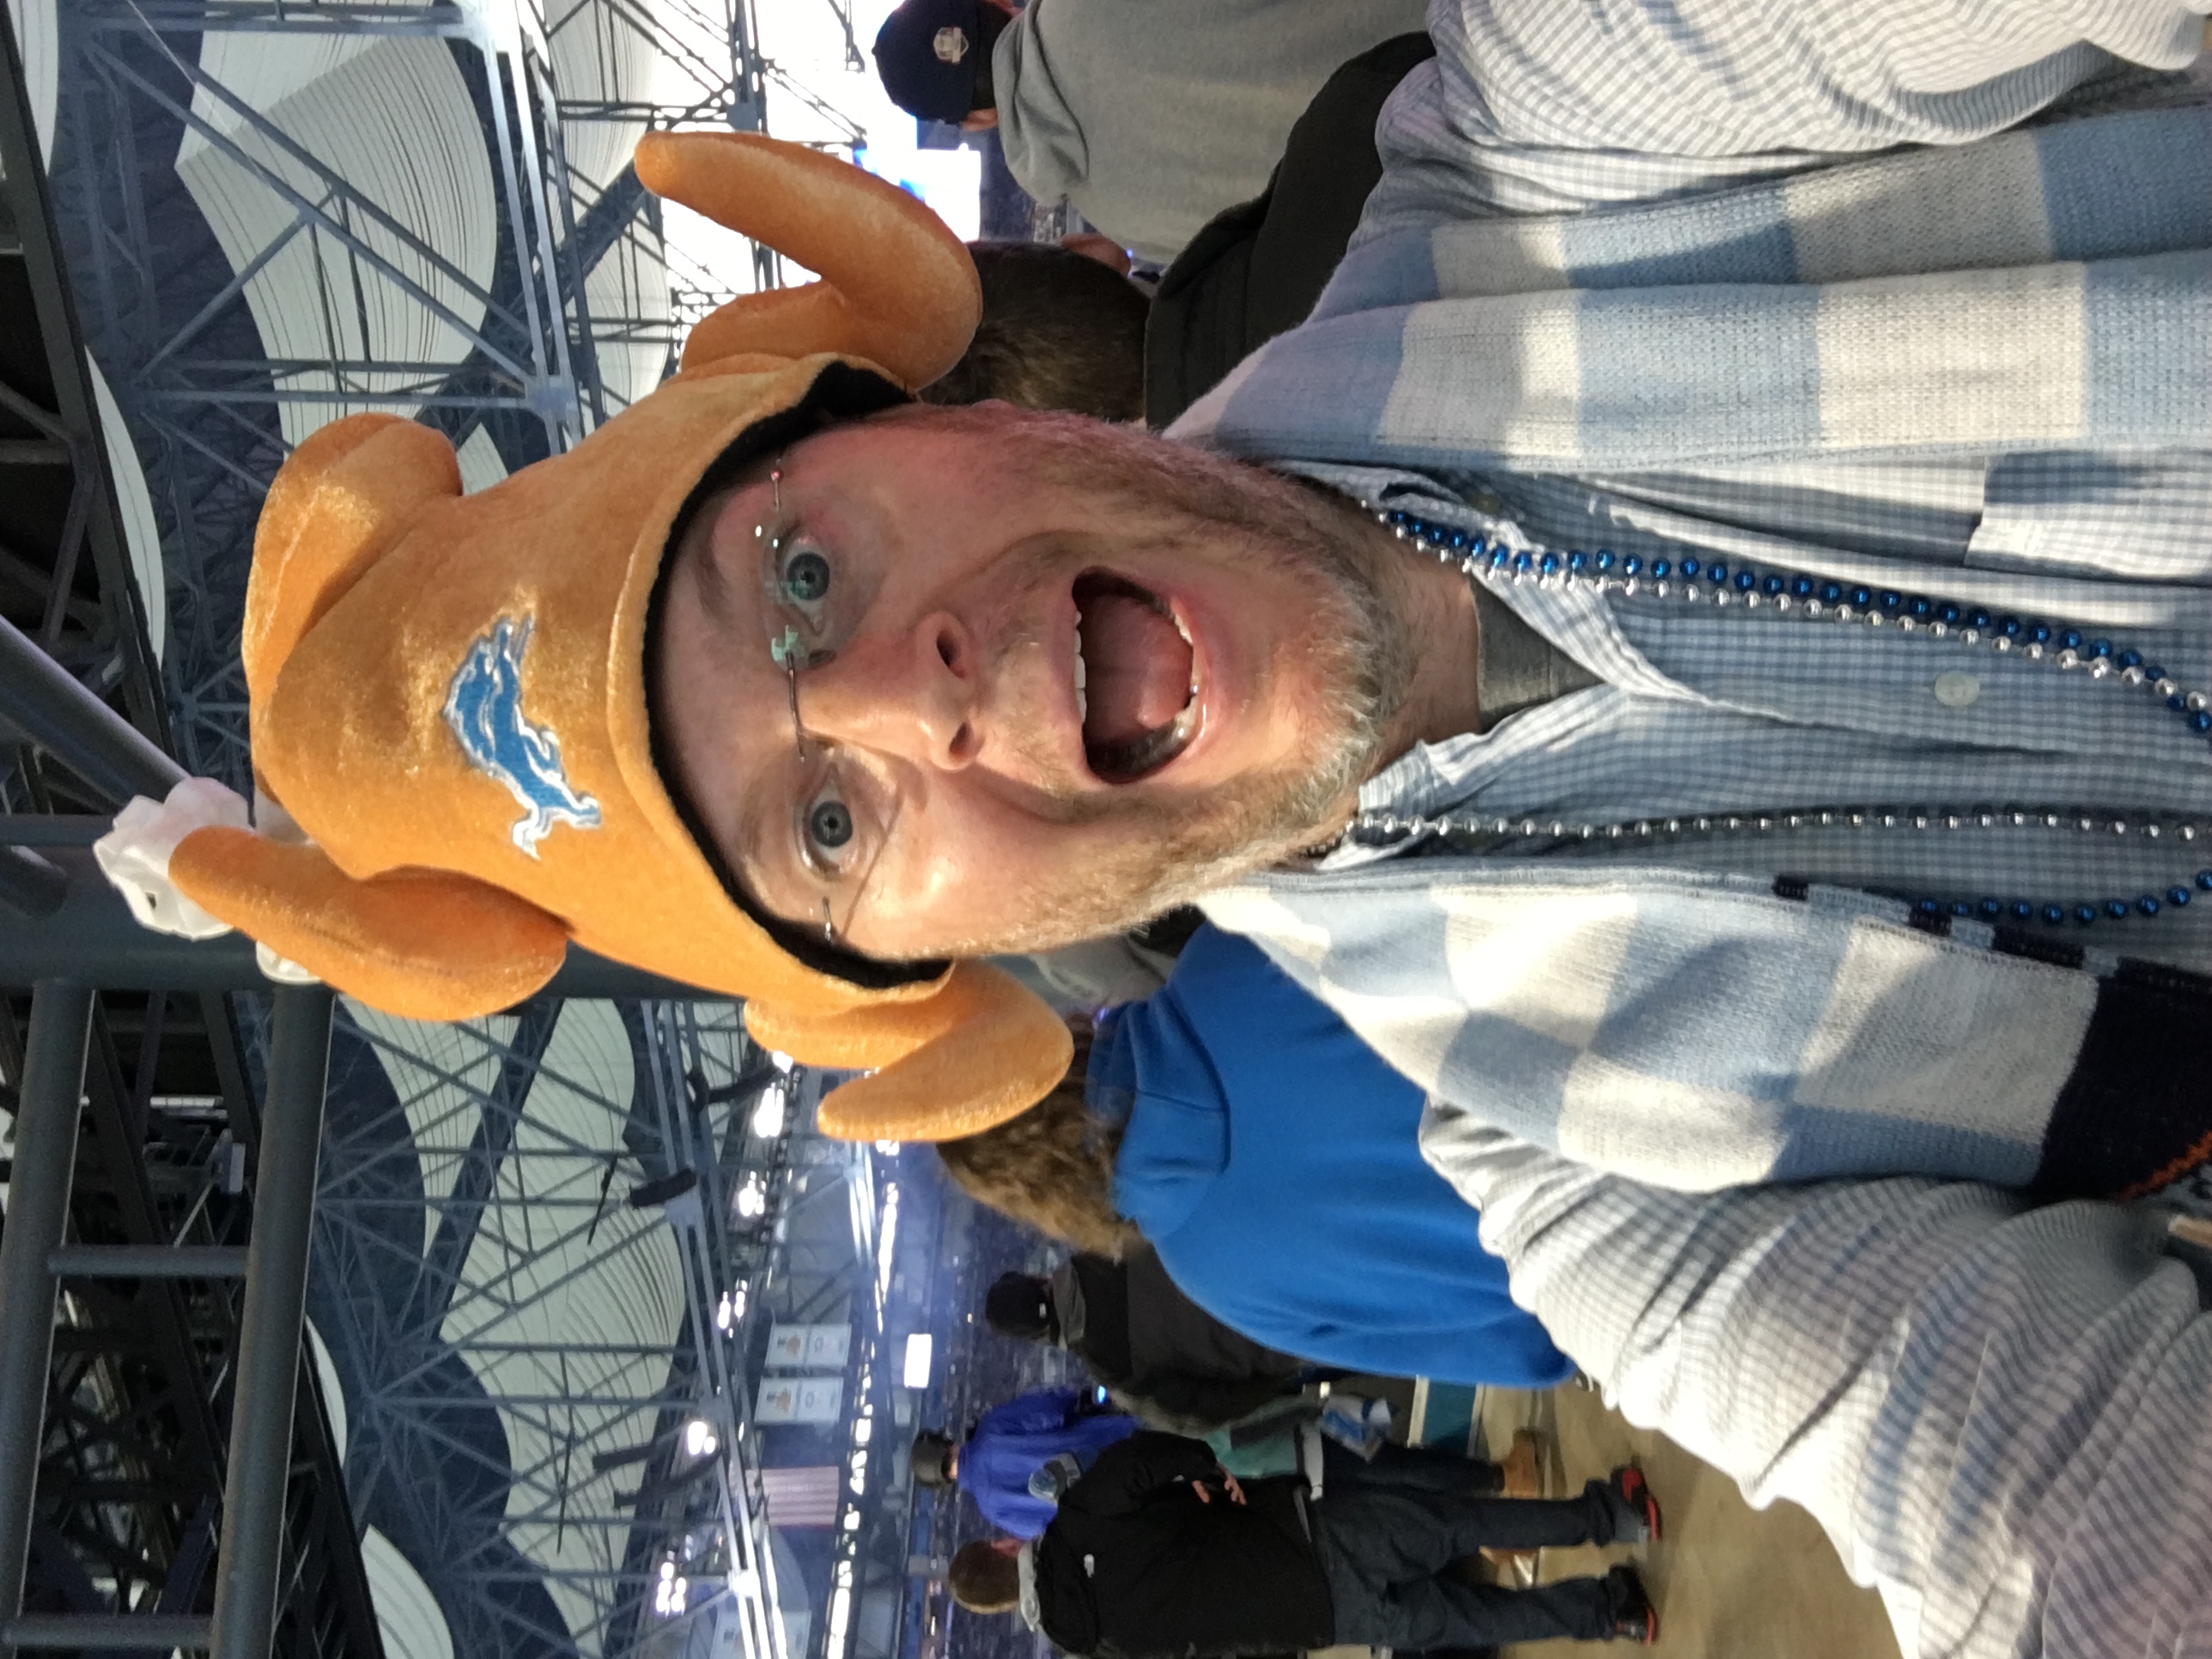 Rich O'Malley seeing the Lions in Detroit. (Post Hill Press)